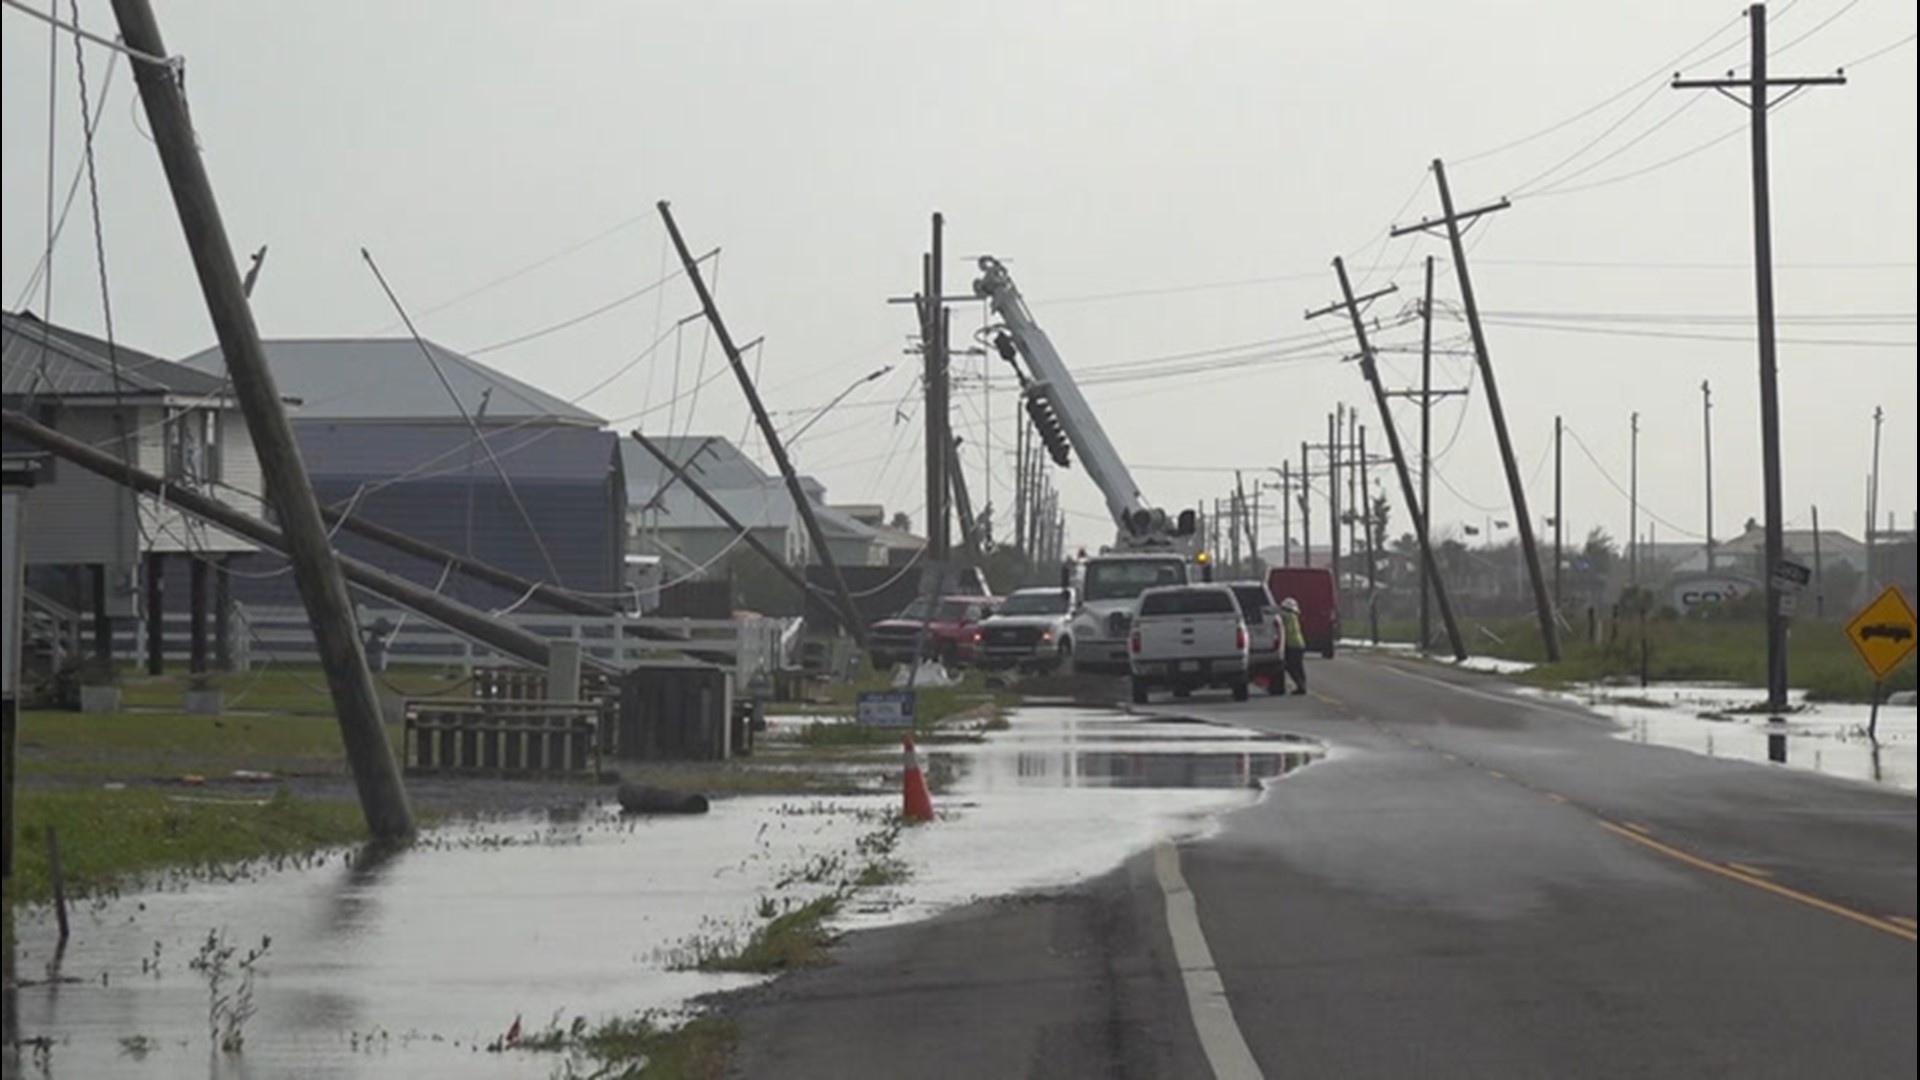 Grand Isle, Louisiana, became severely inundated on April 14, after a powerful storm swept through. High-speed winds caused severe damage.